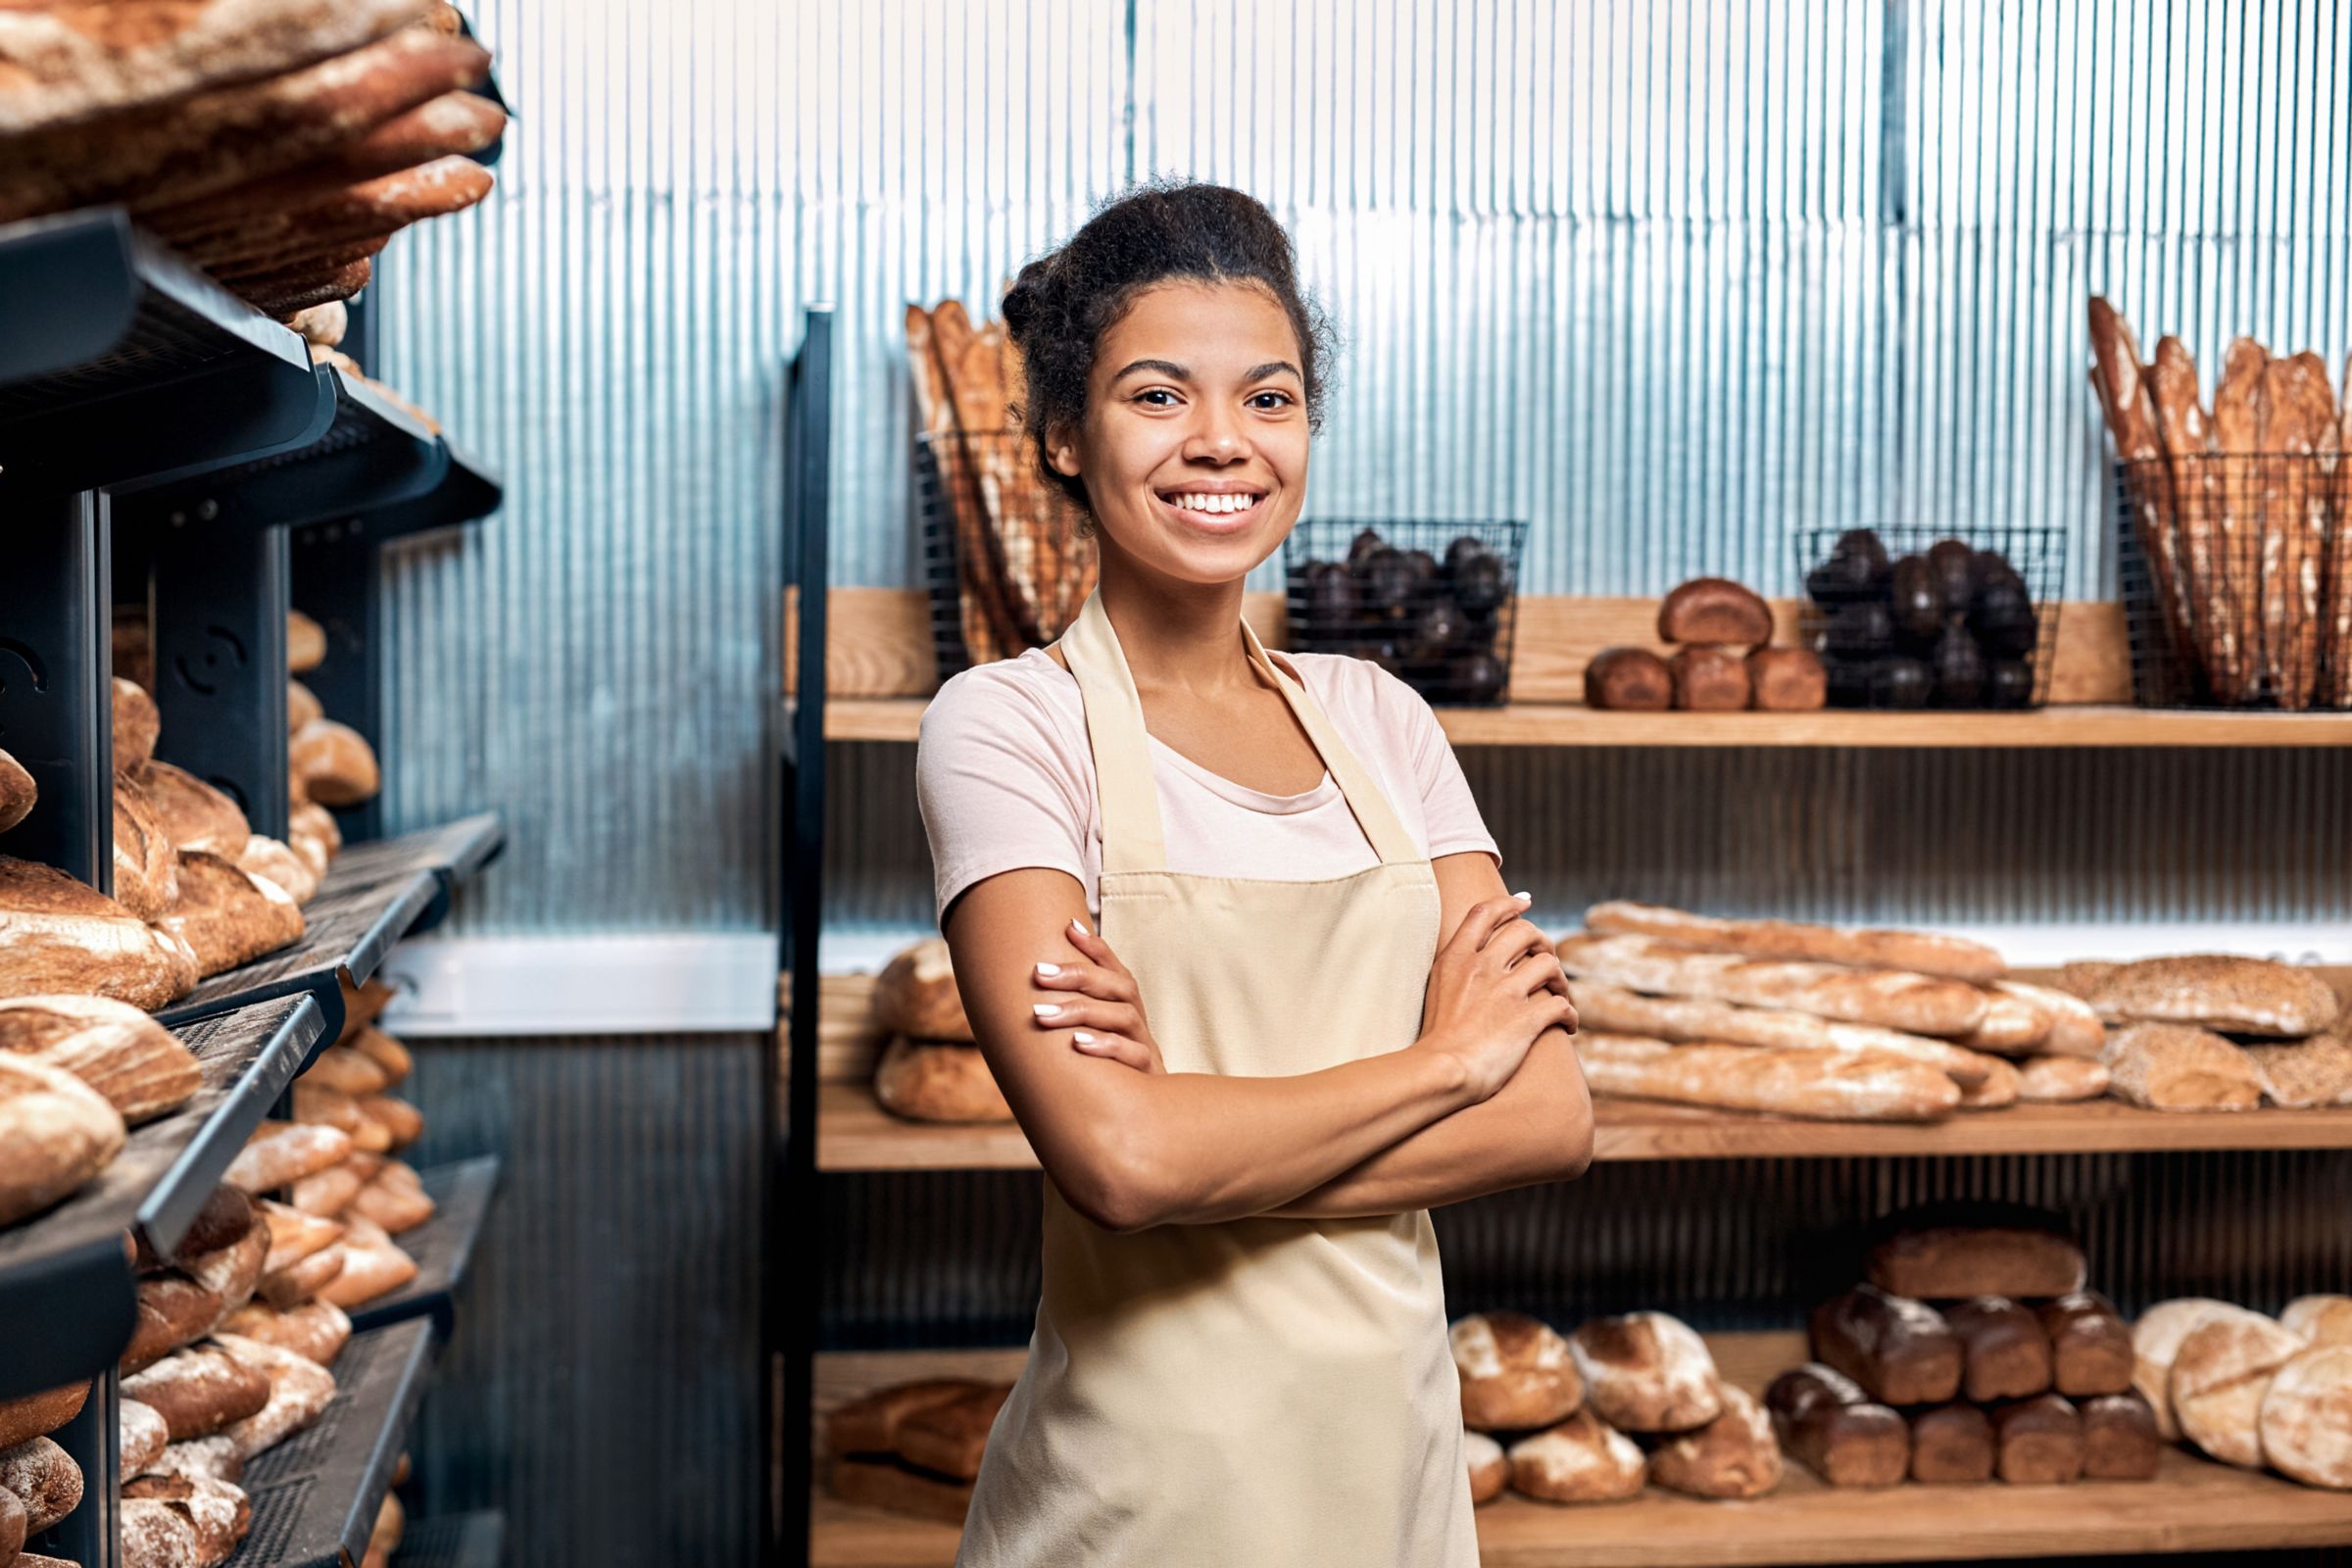 a woman in an apron standing in front of a shelf of bread